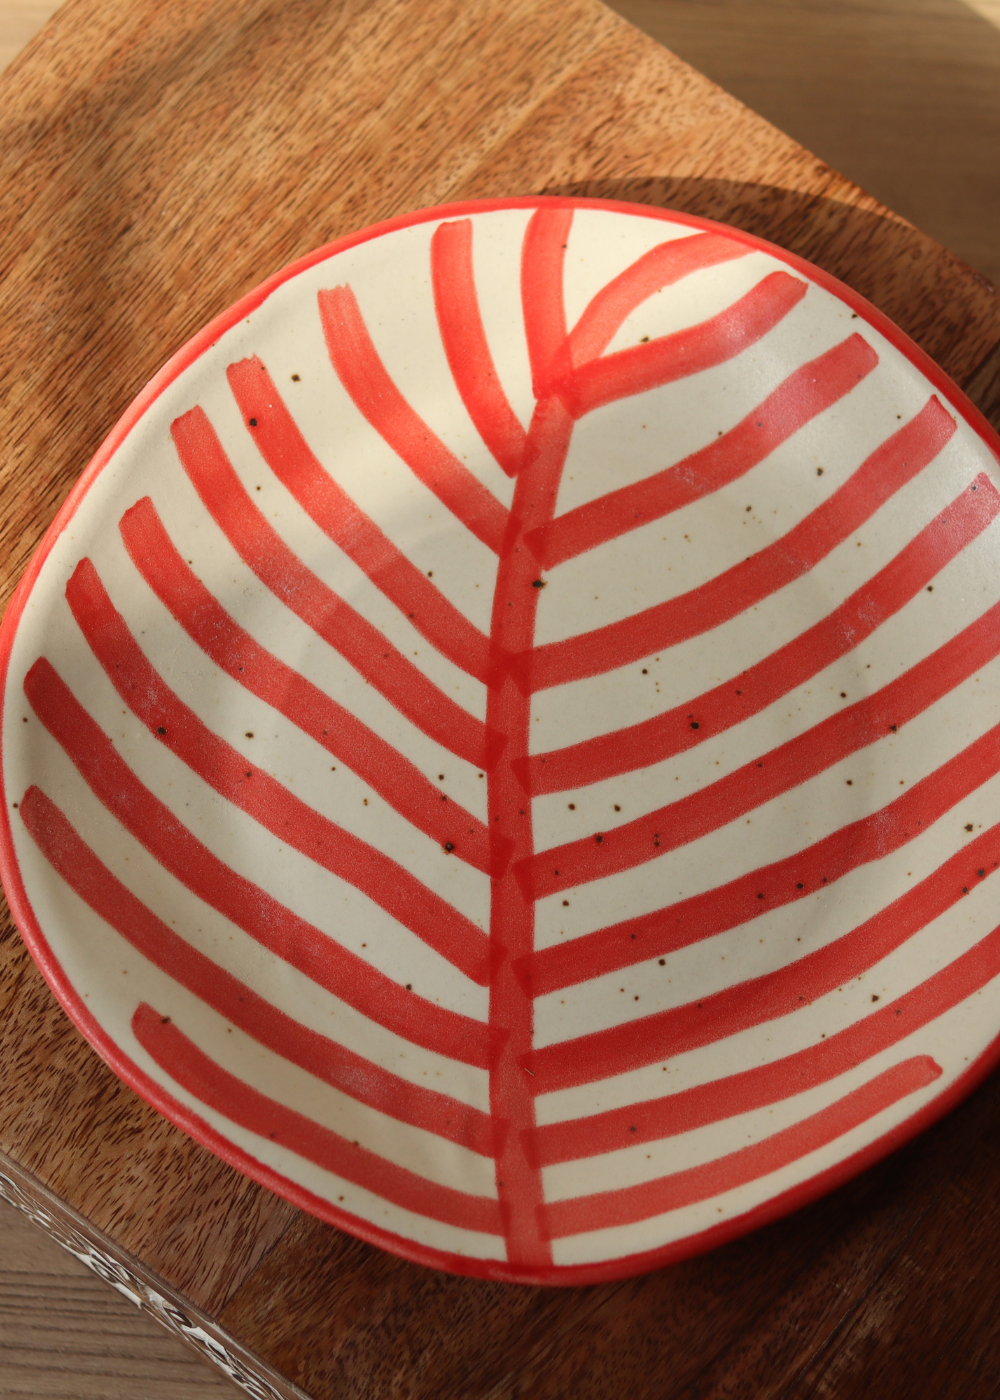 Red leaf plate on wooden surface 